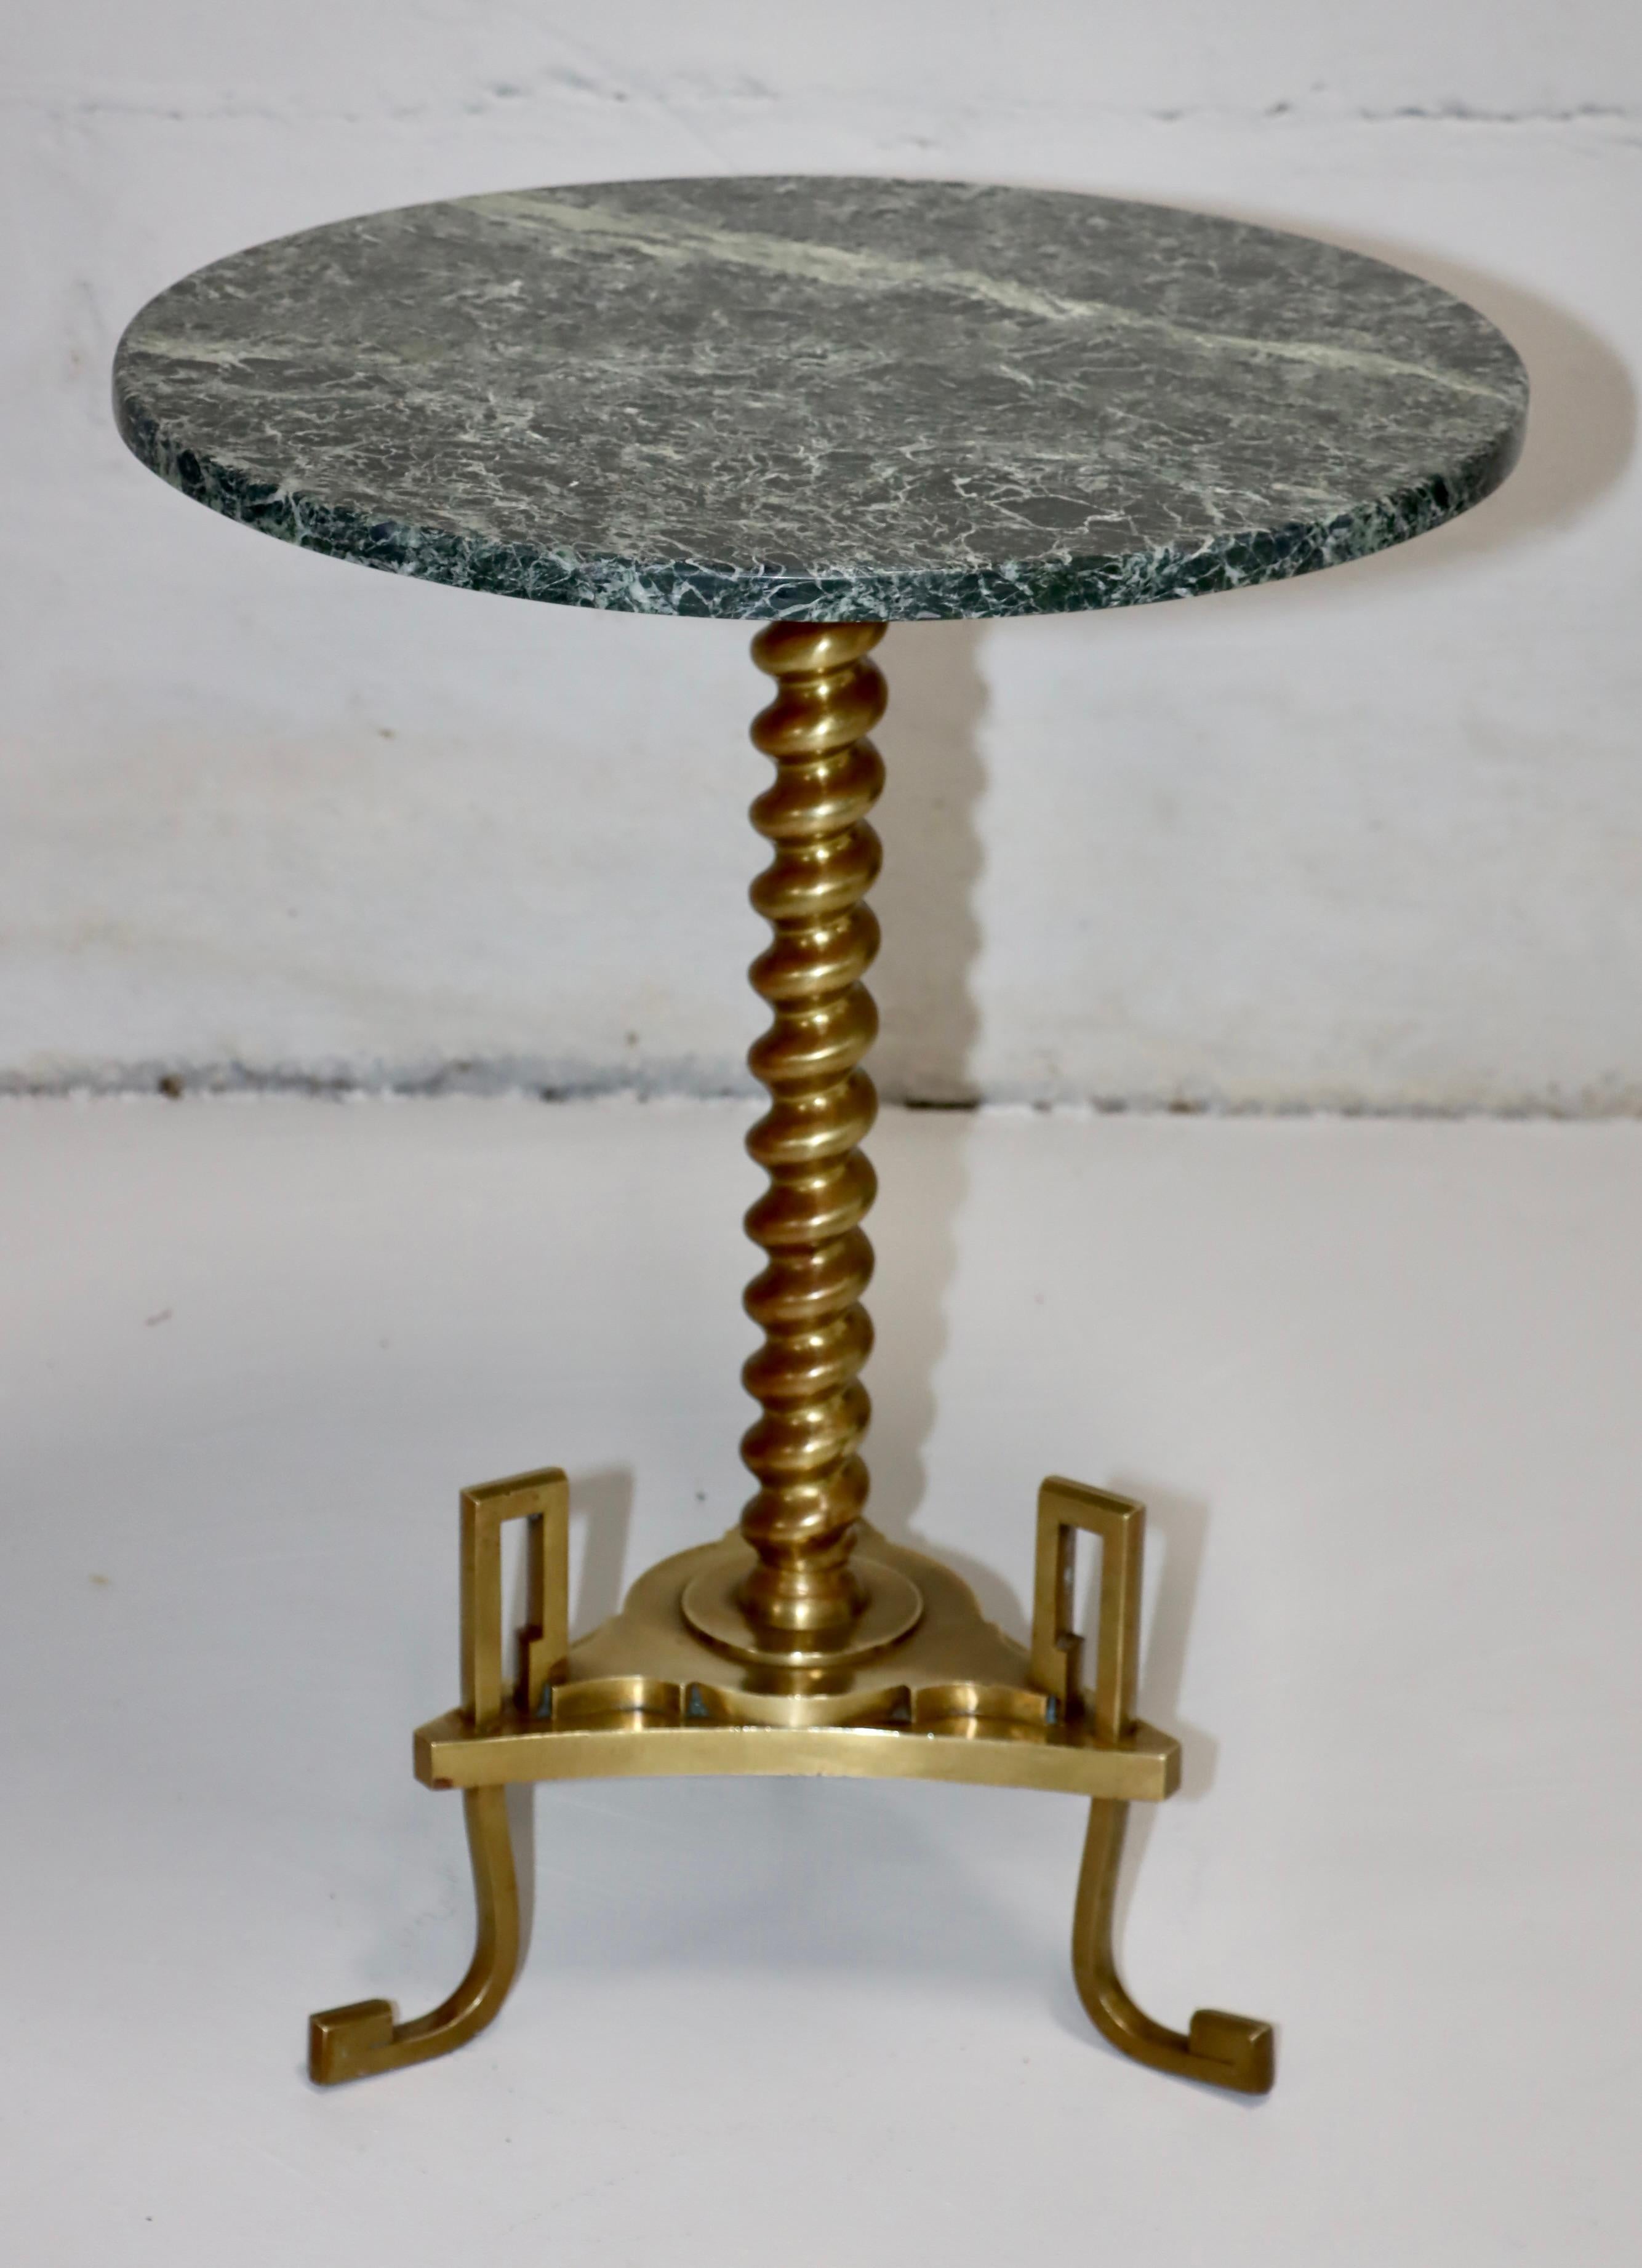 1950's mid-century modern Greek key French bronze and marble side table, in vintage condition with some wear and patina to the bronze due to age and use.